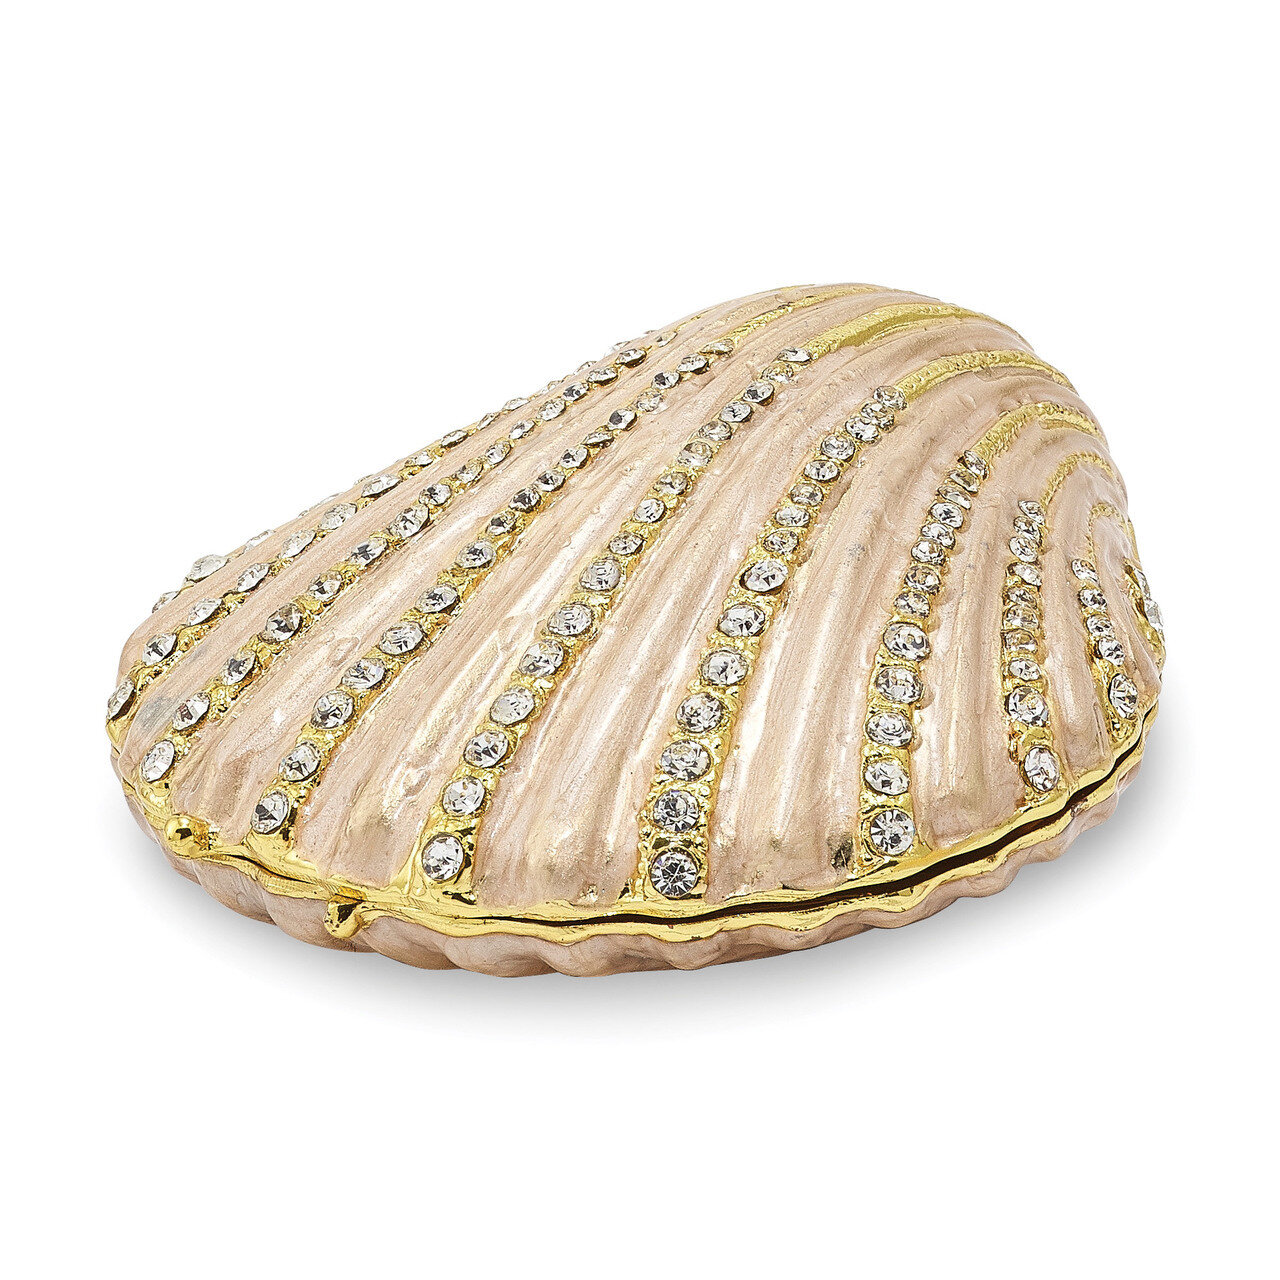 Clam Shell Trinket Box Enamel on Pewter by Jere